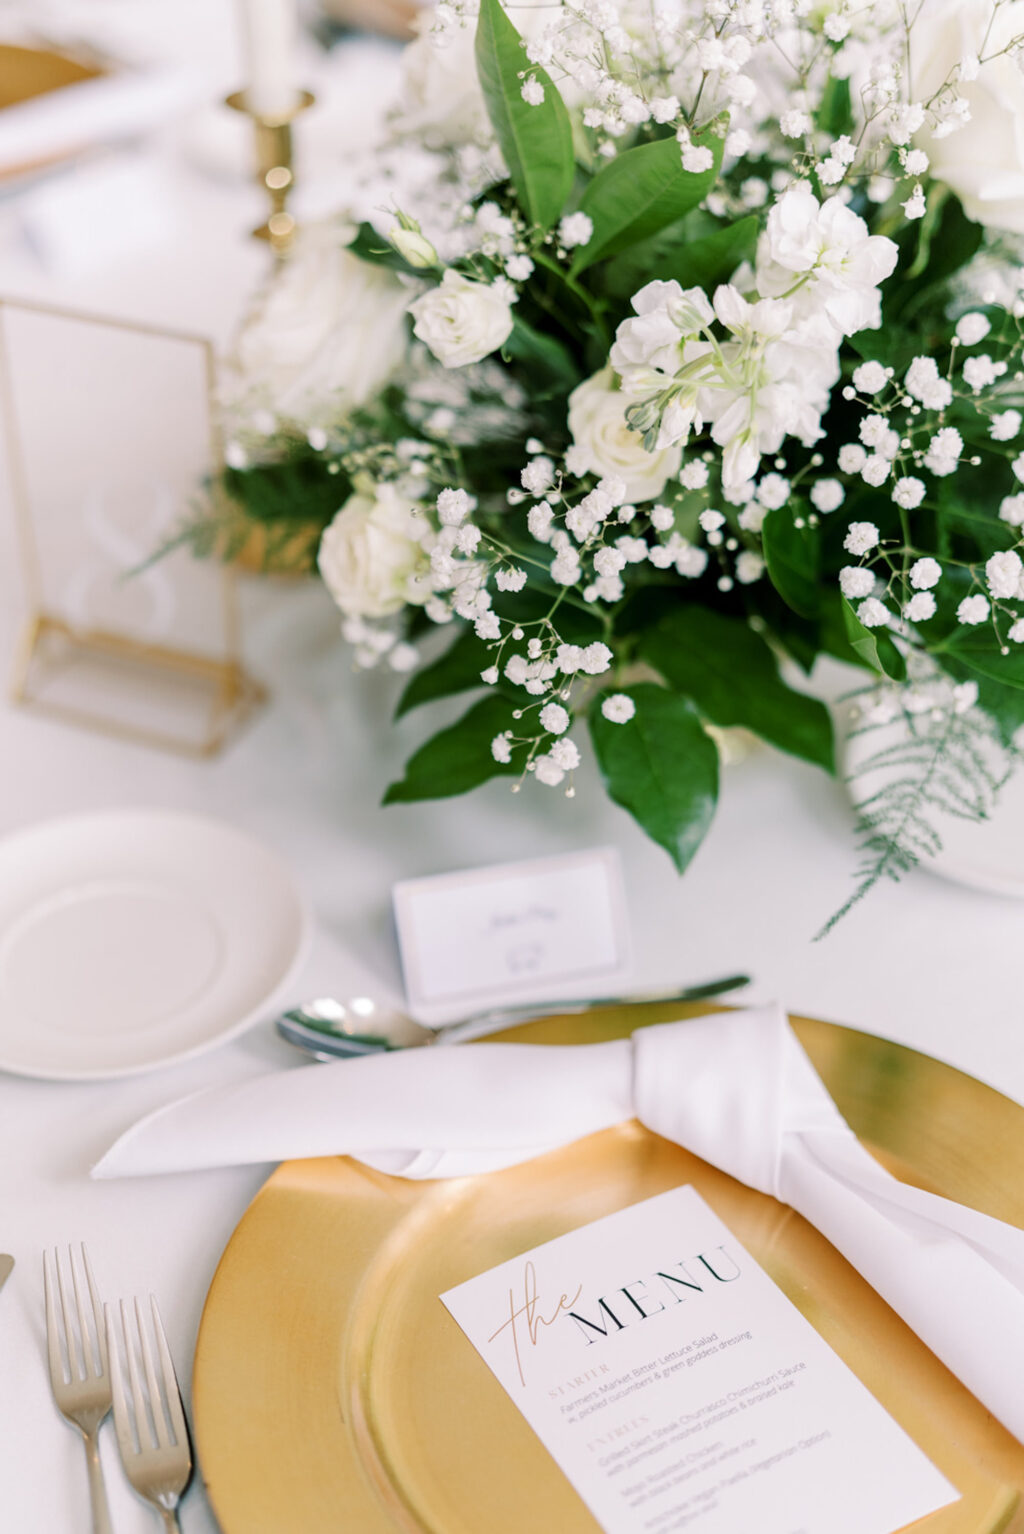 White and Gold Wedding Reception Table Setting Inspiration | Baby's Breath, White Stock Flowers Centerpiece Inspiration | Ybor Planner Olive Tree Weddings